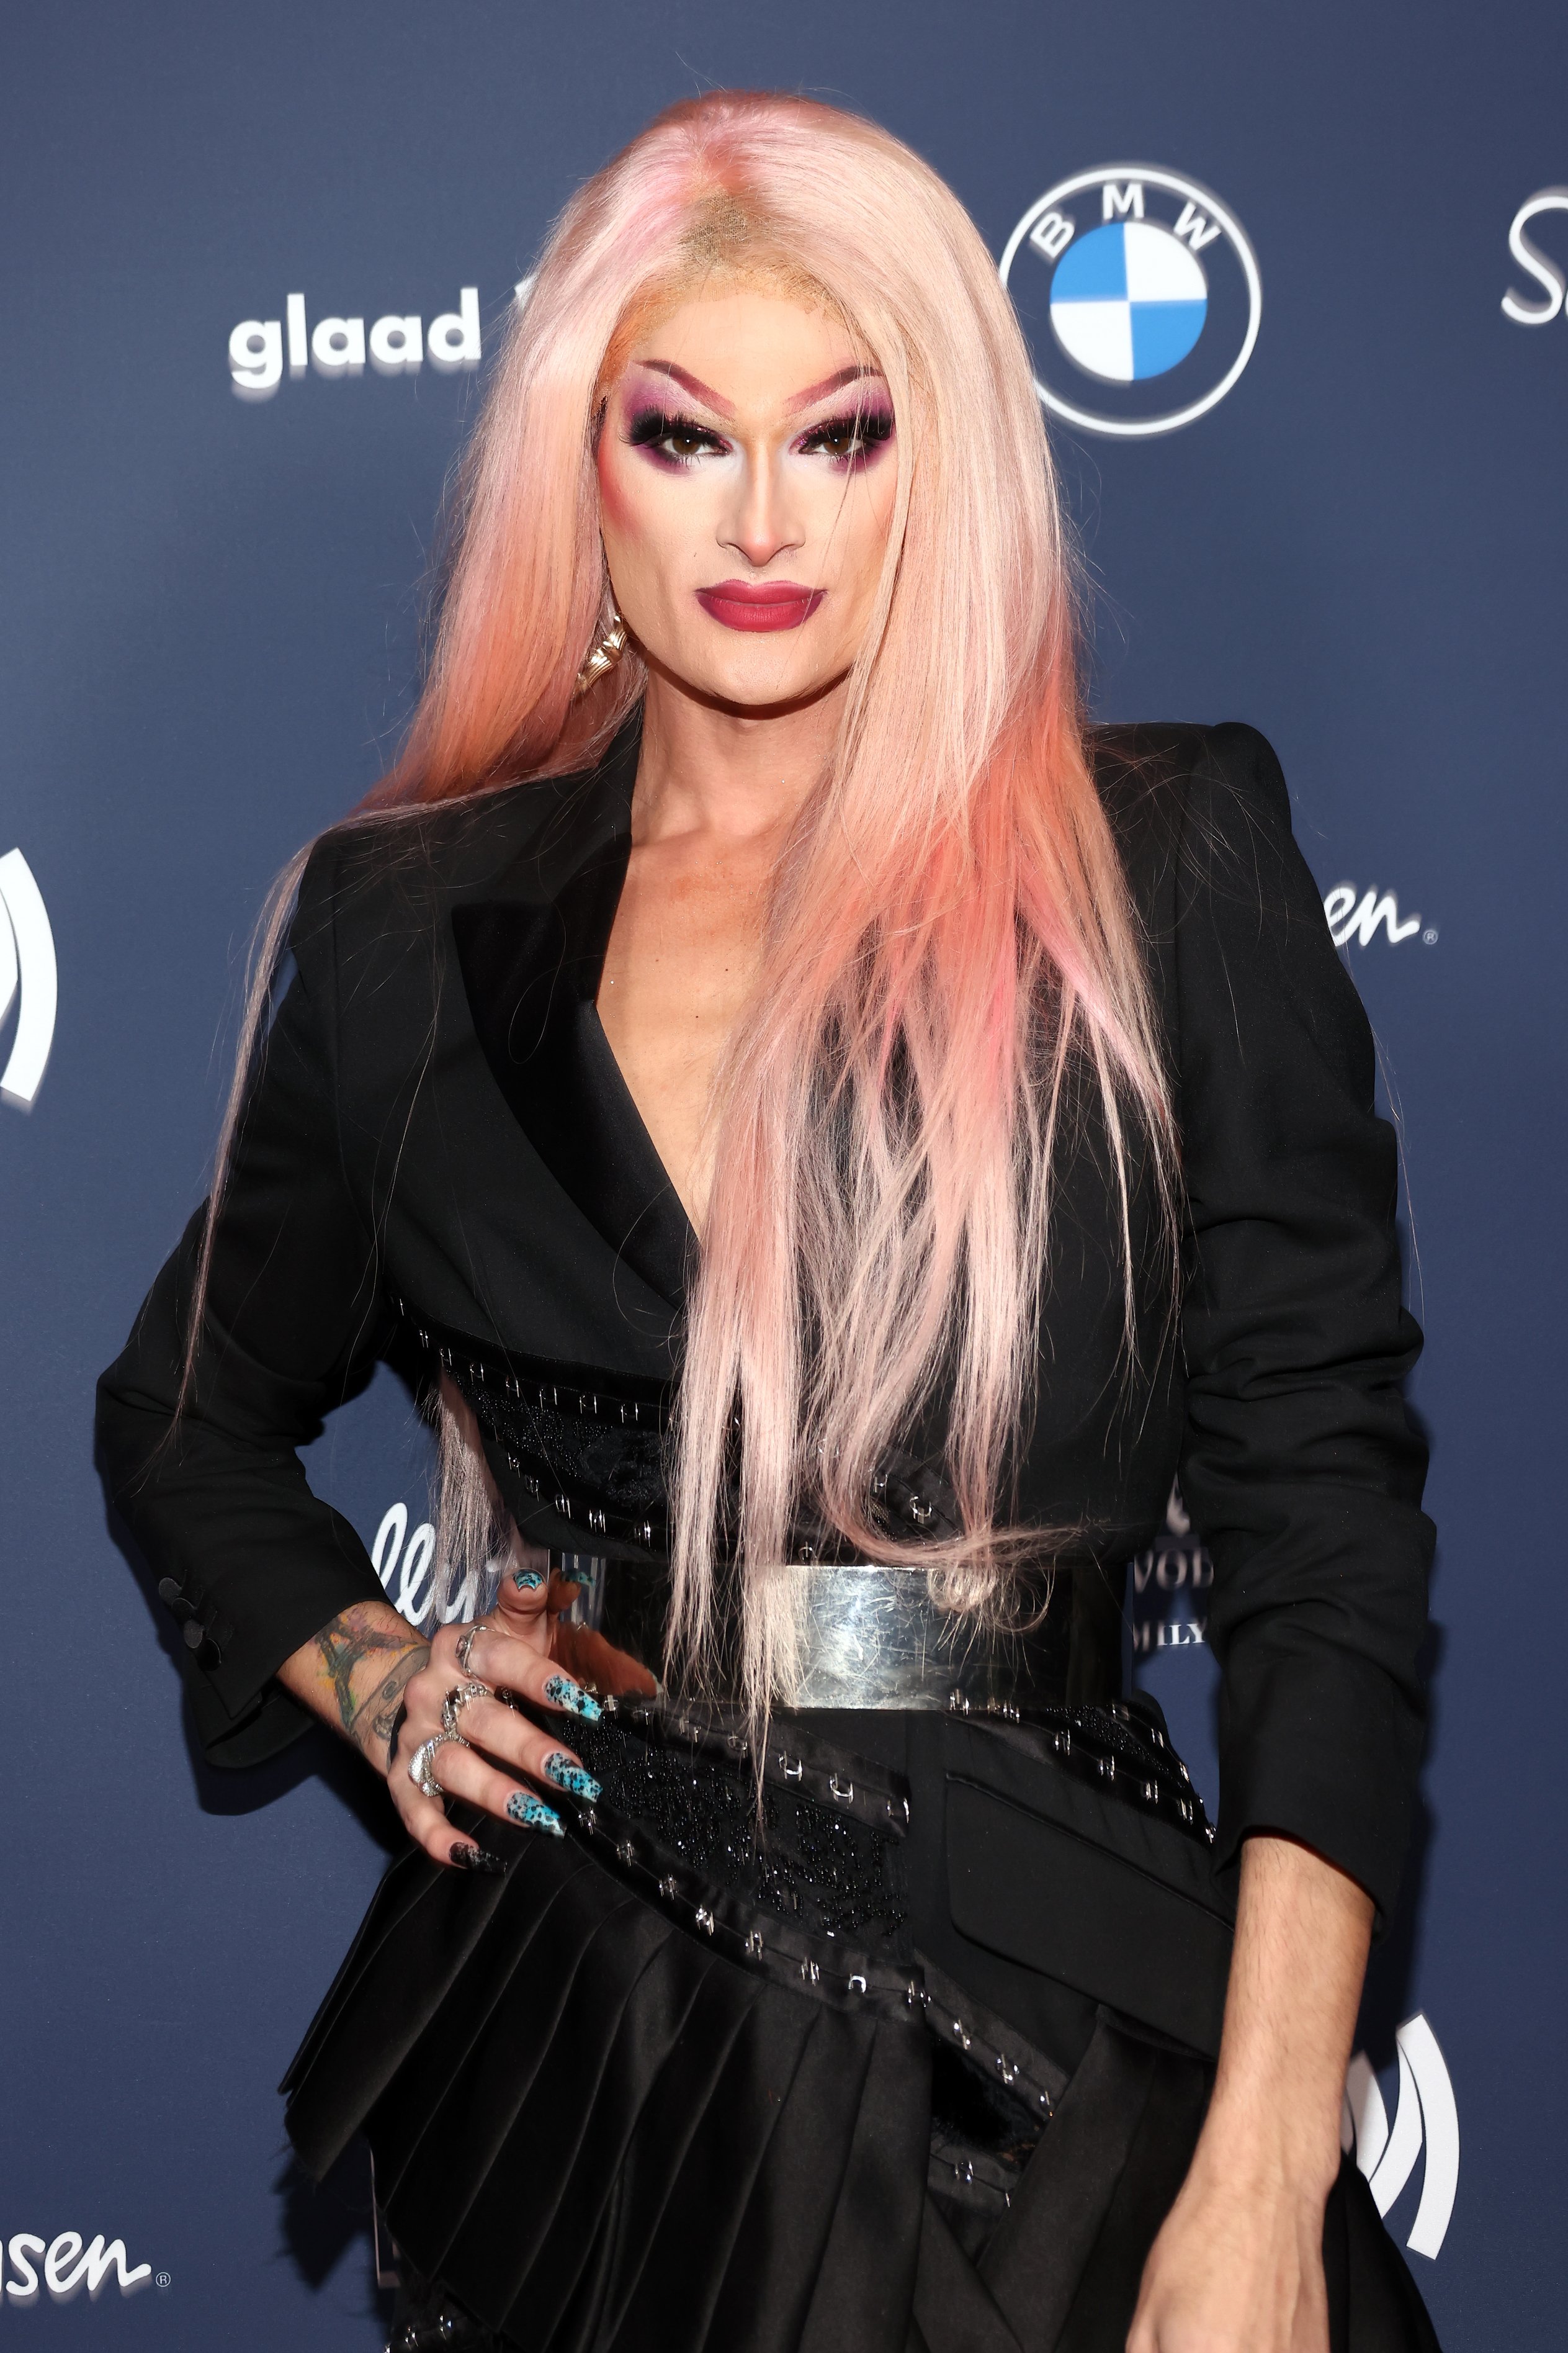 Rhea Litré attends the GLAAD Tidings Presented by Ketel One at The GRAMMY Museum on December 03, 2022 in Los Angeles, California. | Source: Getty Images